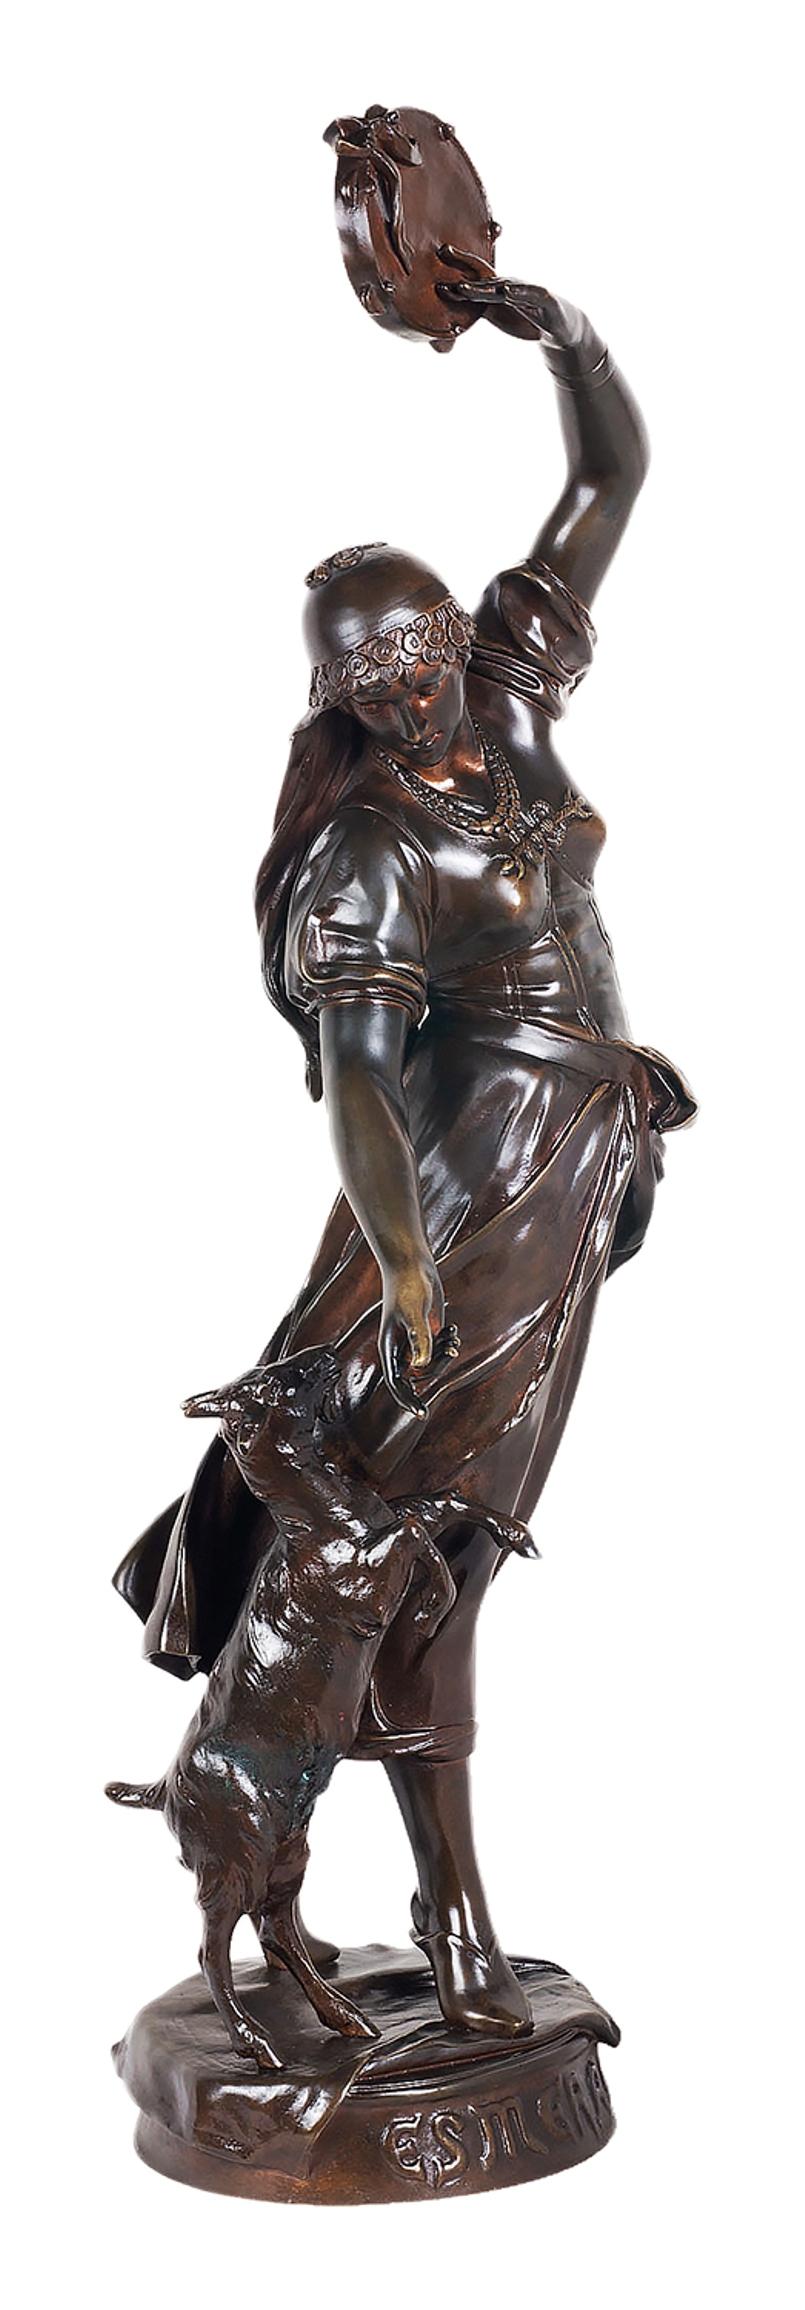 A fine quality 19th century patinated bronze statue of Esmeralda.

Esmeralda, born Agnès, is a fictional character in Victor Hugo's 1831 novel The Hunchback of Notre-Dame. She is a French Roma girl. She constantly attracts men with her seductive